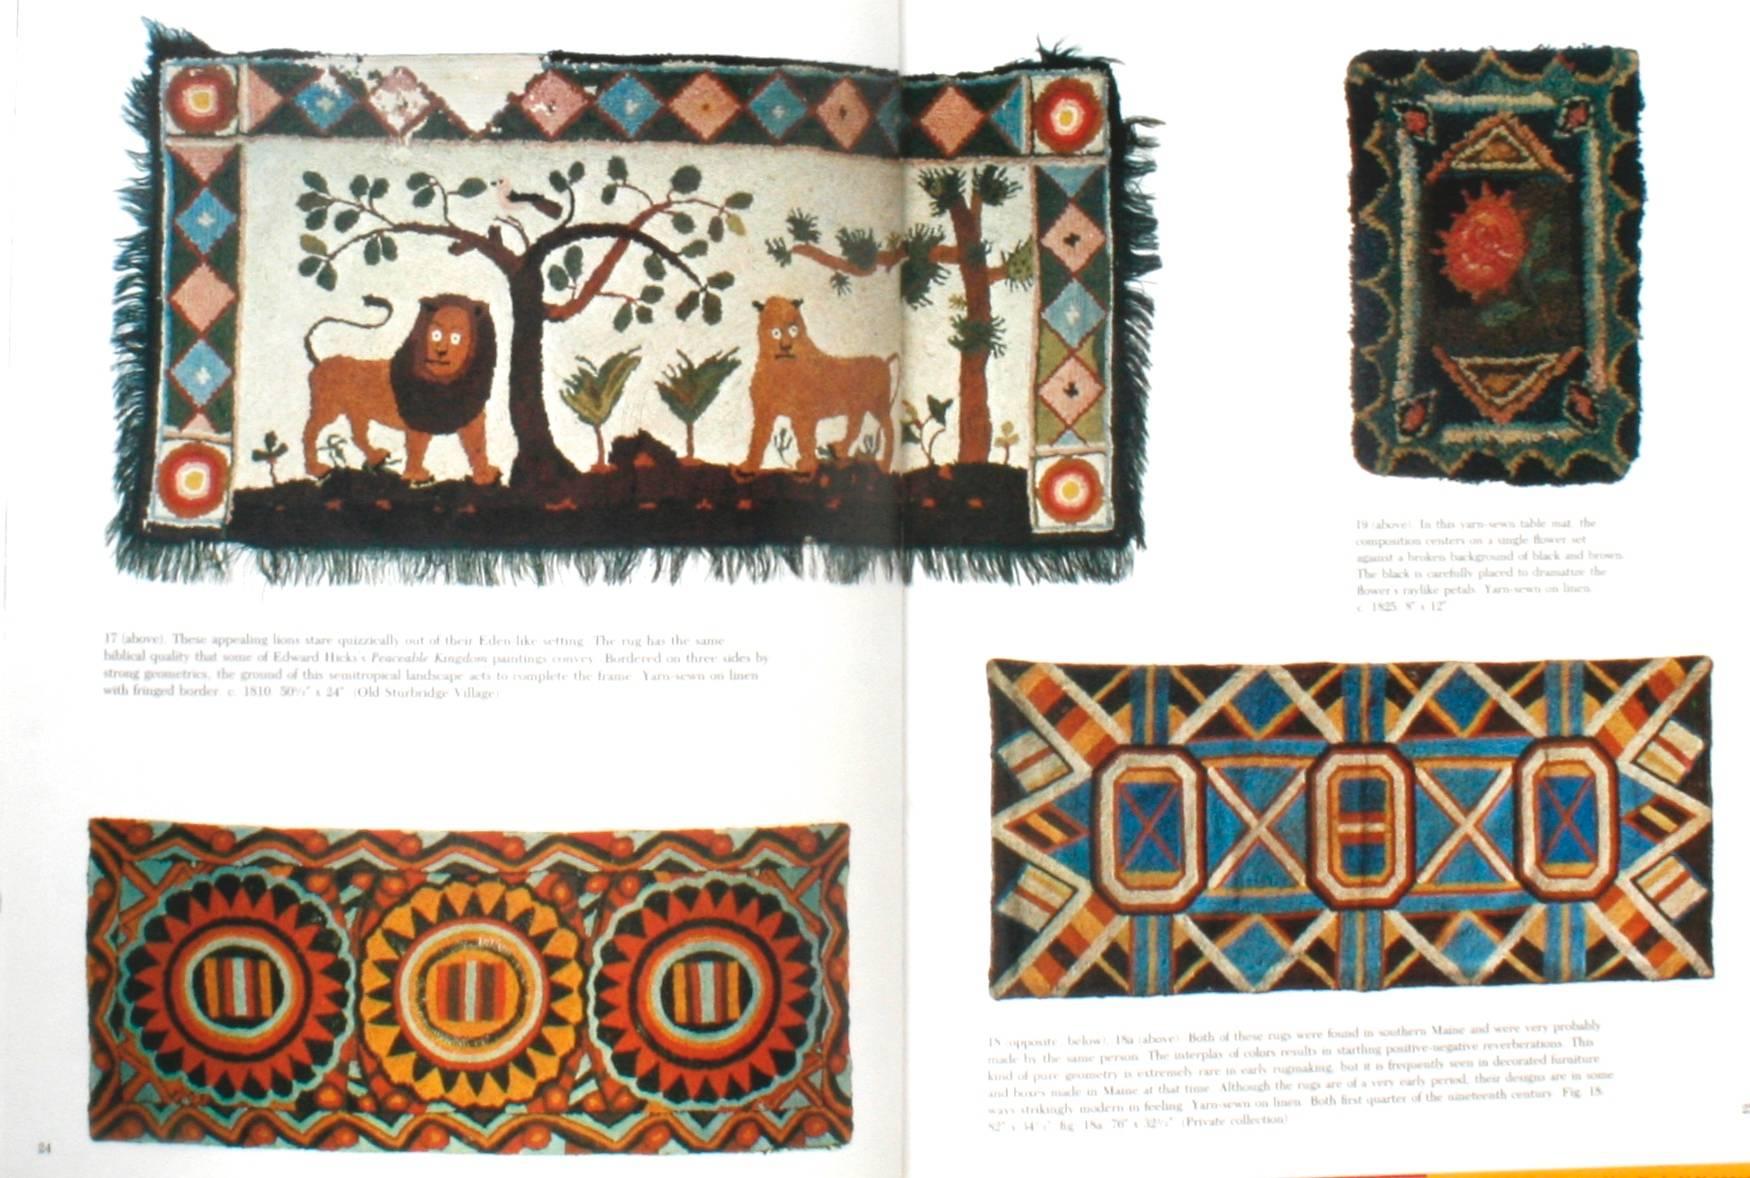 American hooked and sewn rugs, Folk Art underfoot by Joel and Kate Kopp. New York: E.P. Dutton, Inc., 1985. Hardcover with dust jacket. 141 pp. A fascinating book on the origins and development of the hooked rug from its beginnings in the 18th and